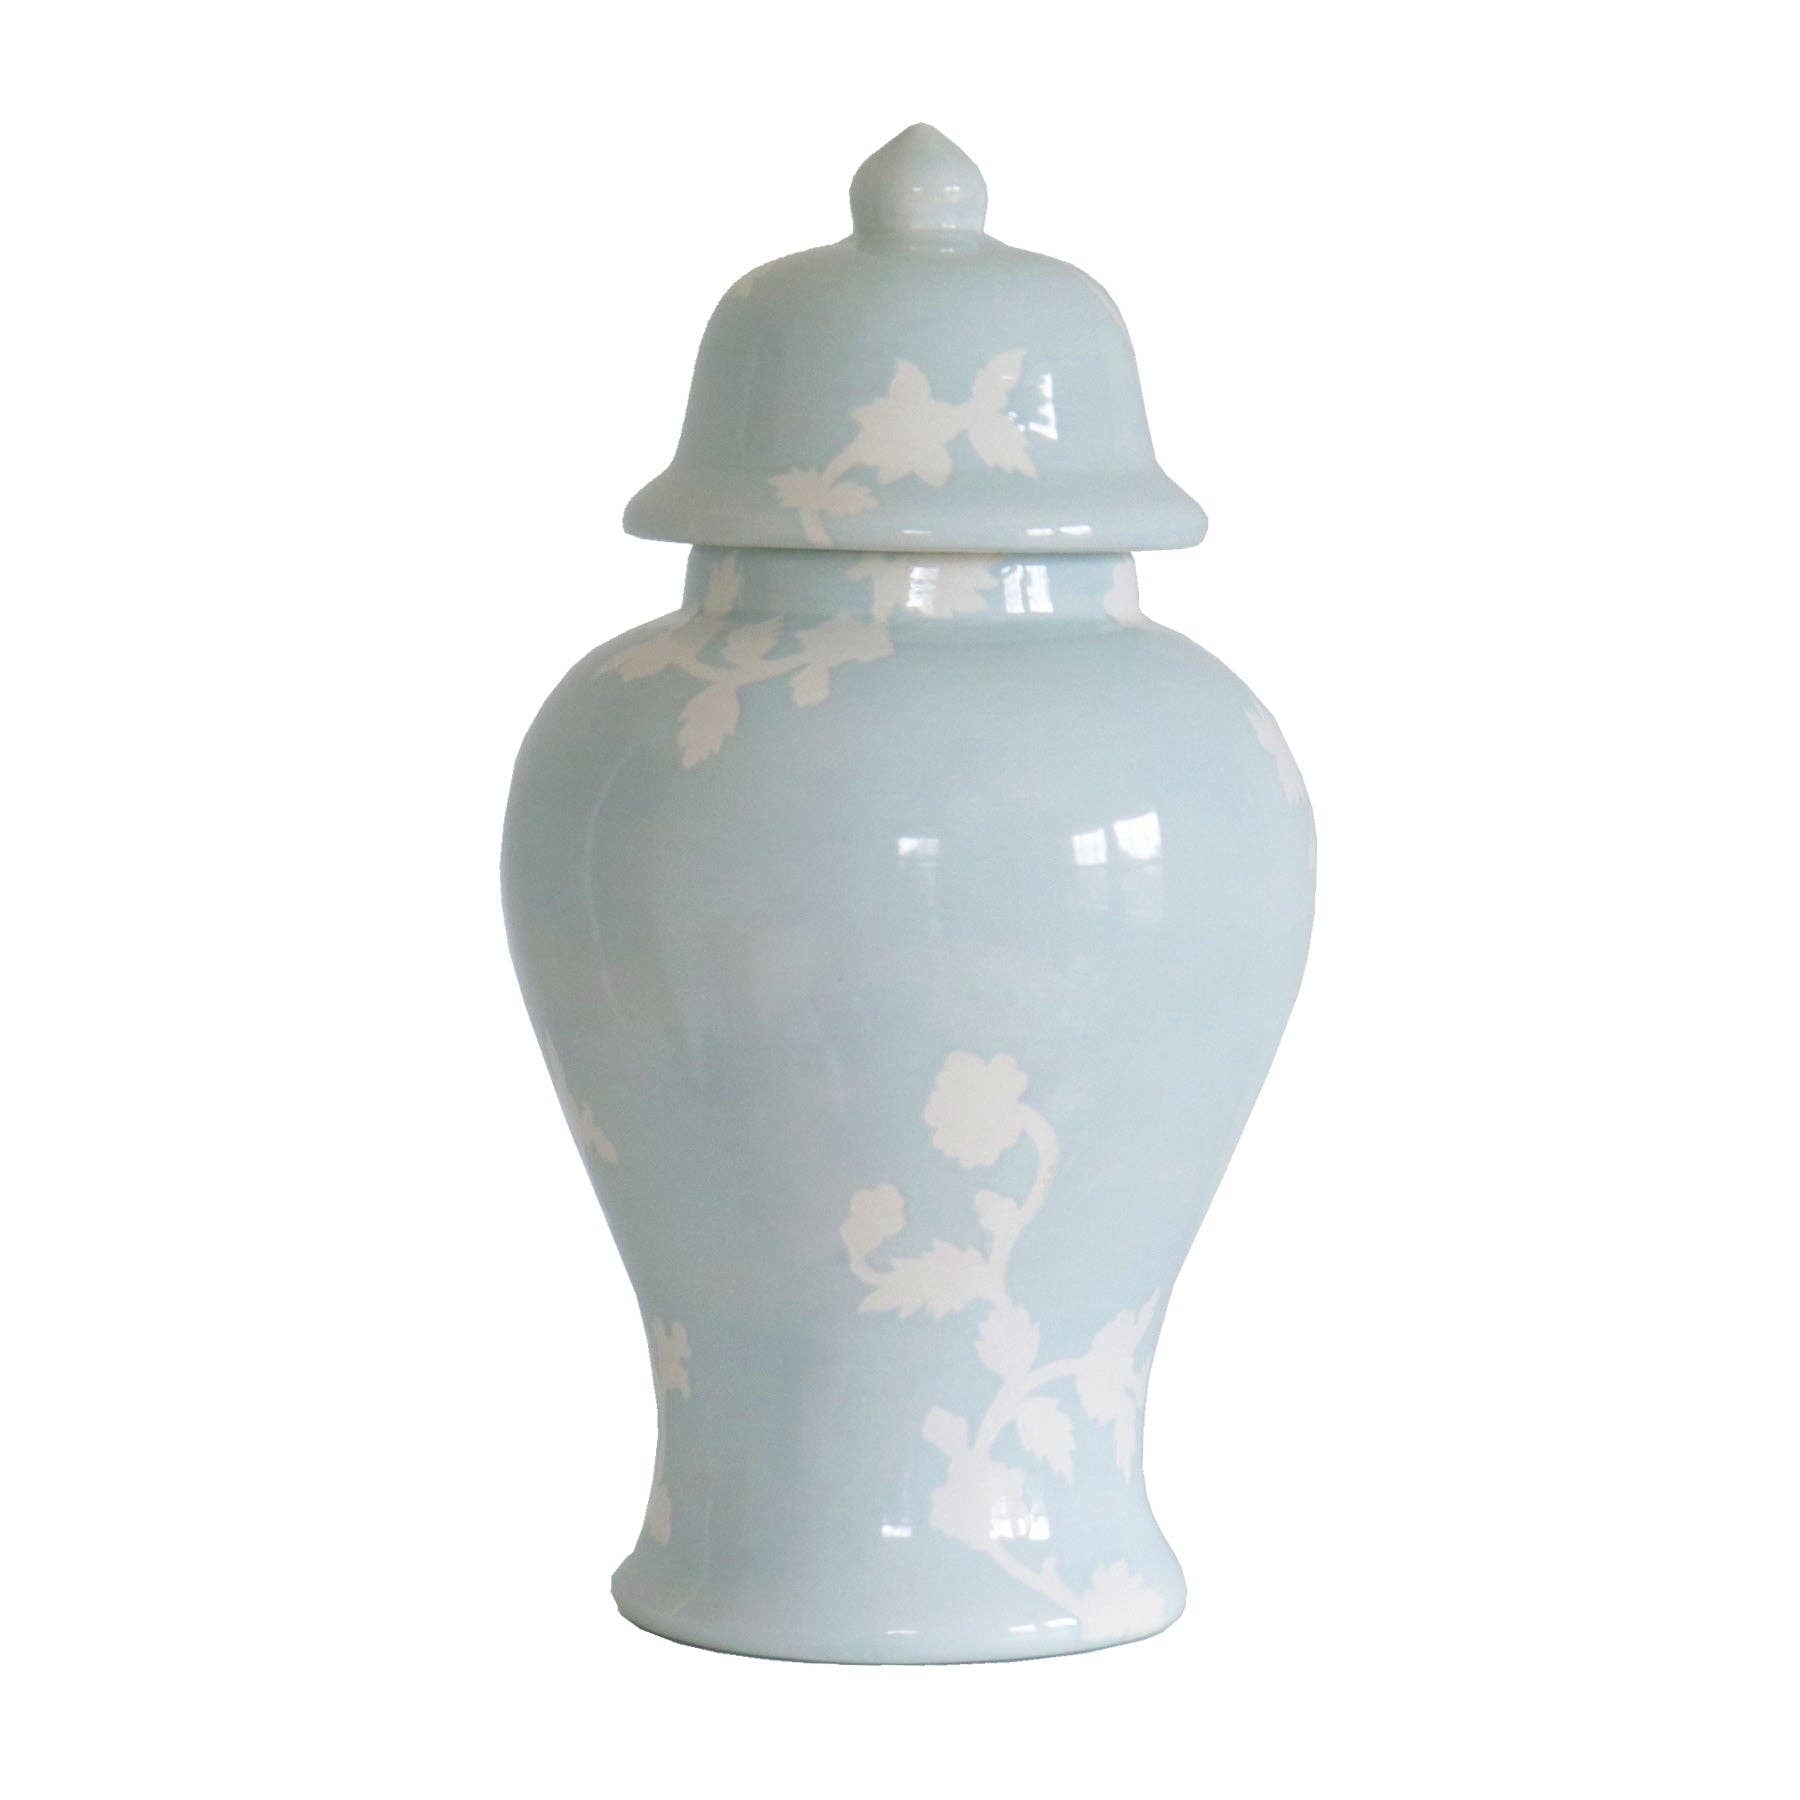 Chinoiserie Dreams Ginger Jar in Hydrangea Light Blue -Large - The Preppy Bunny